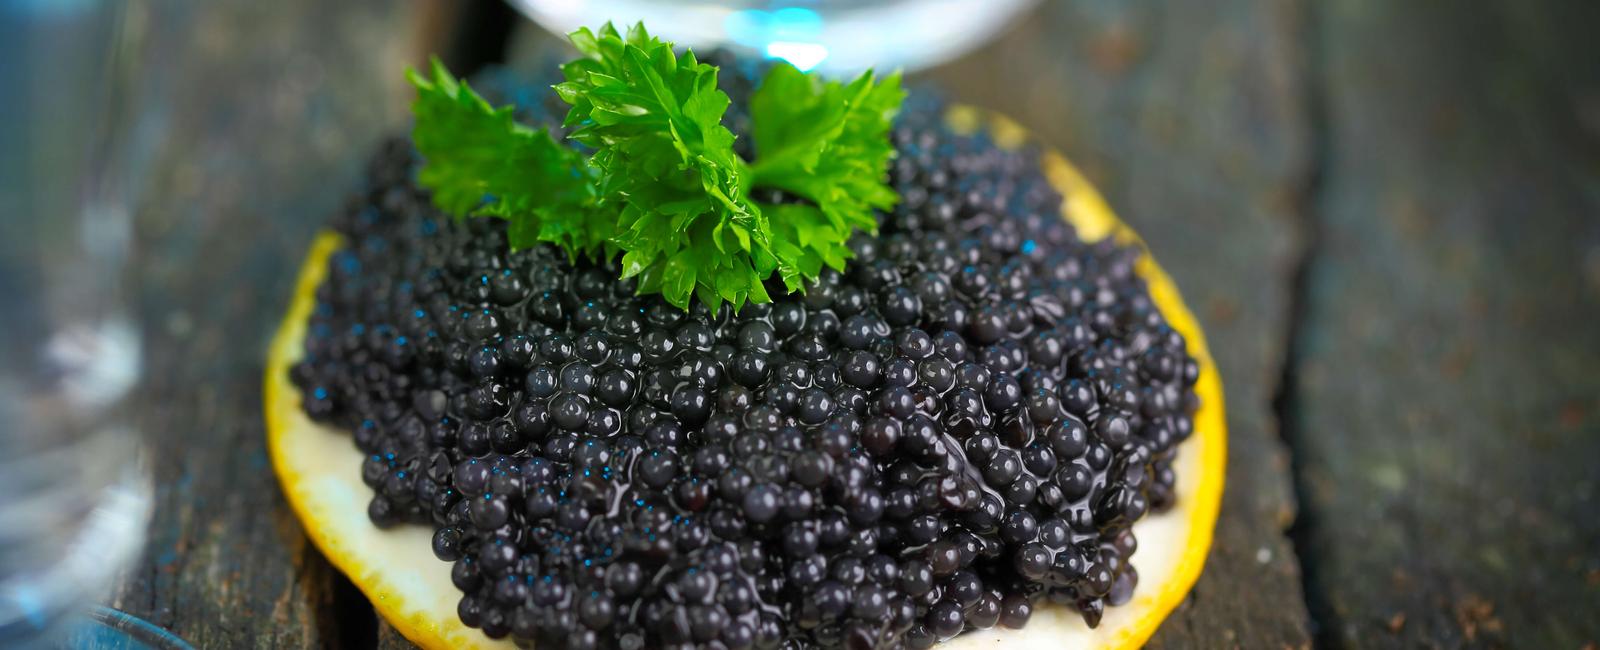 Caviar known internationally as an extravagant delicacy is farmed from the caspian sea as it is a major site for roe farming